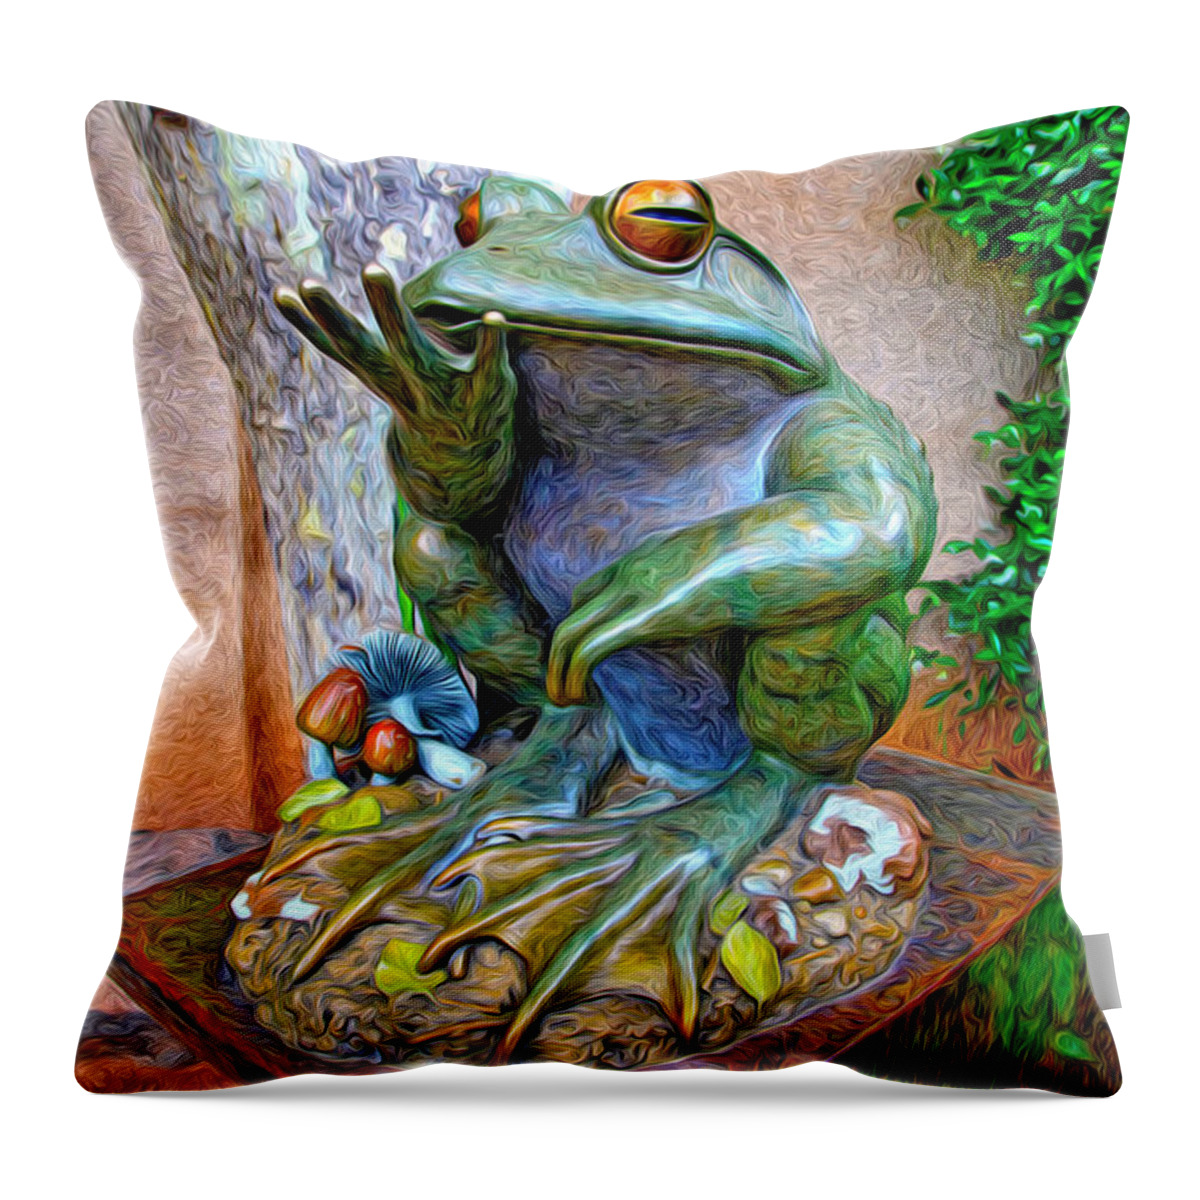 Fine Art Frog Photography. Frog Art. Wall Art Photography. Mixed Media Photography. Mixed Media Note Cards. Mixed Media Greeing Cards. Colord Frogs. Painted Frogs. Wall Art Frogs. Fine Art Frogs. Frogs. Fish. Water. Ponds. Frog Ponds. Water Fountion. Trees. Wall. Throw Pillow featuring the photograph The Frog by James Steele